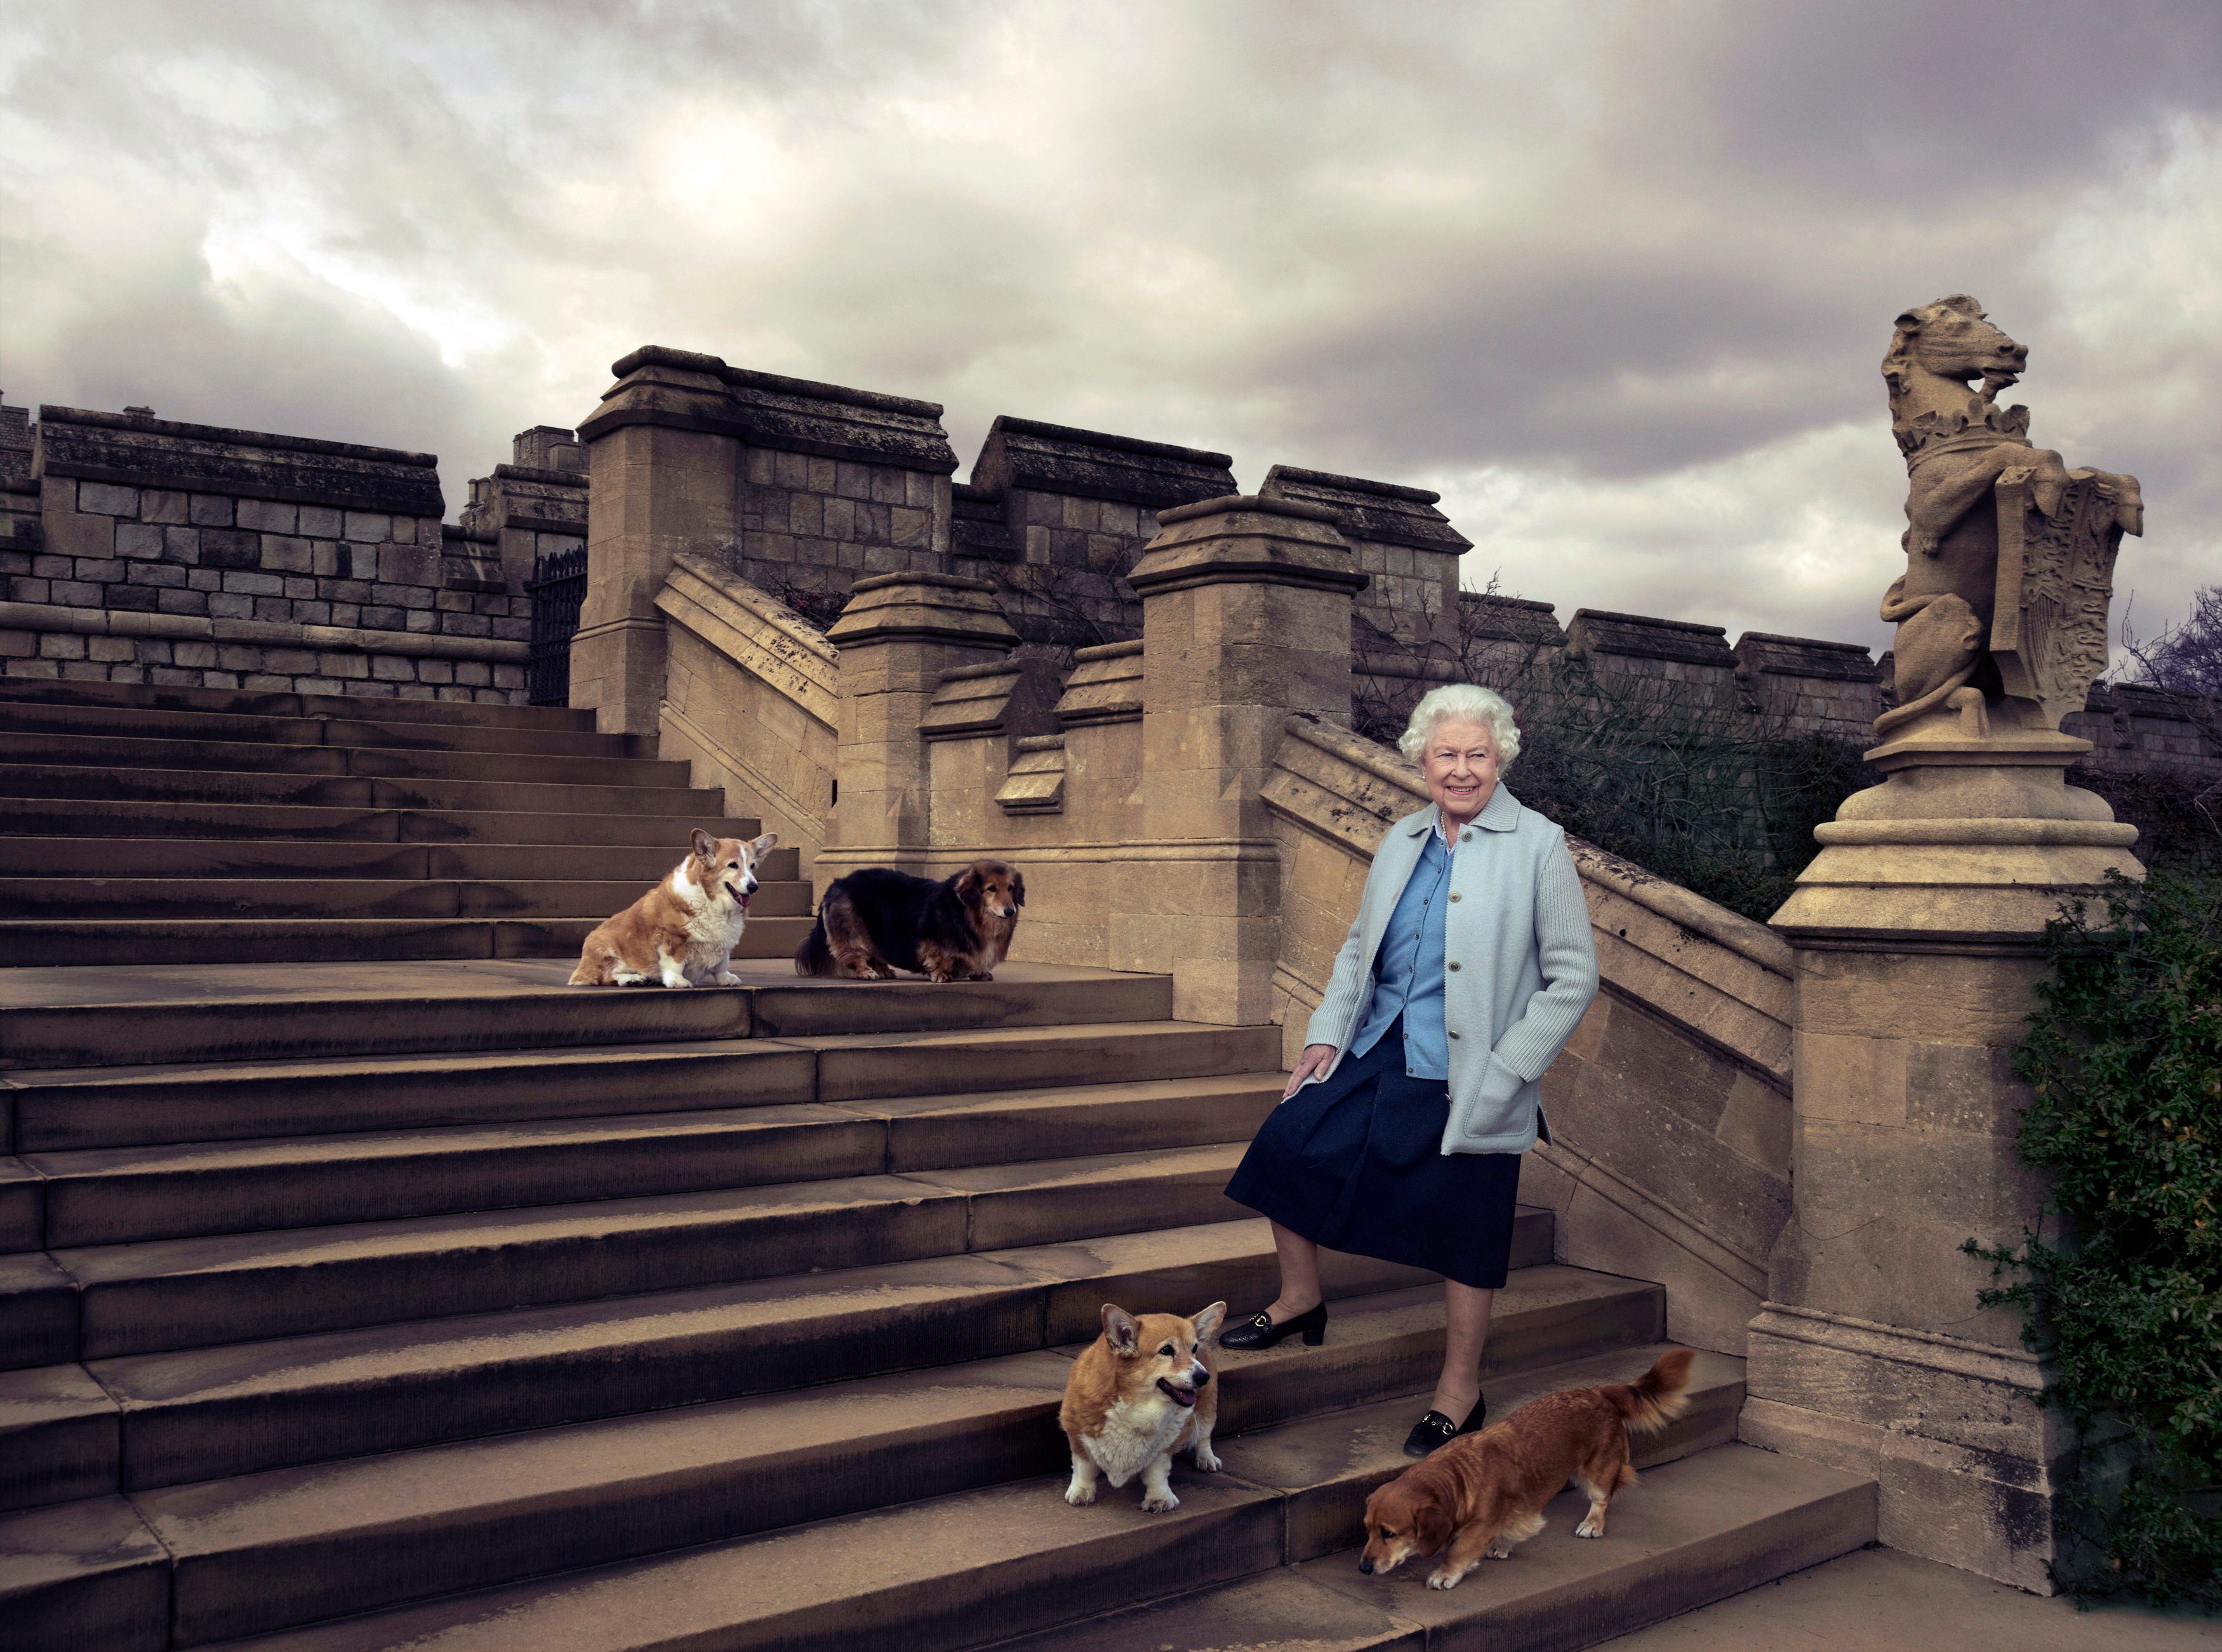 THE QUEEN AND HER DOGS. Queen Elizabeth II is seen walking in the private grounds of Windsor Castle on steps at the rear of the East Terrace and East Garden with four of her dogs: clockwise from top left Willow (corgi), Vulcan (dorgie), Candy (dorgie) and Holly (corgi). Photo from EPA/©2016 Annie Leibovitz/Handout UK and Ireland  